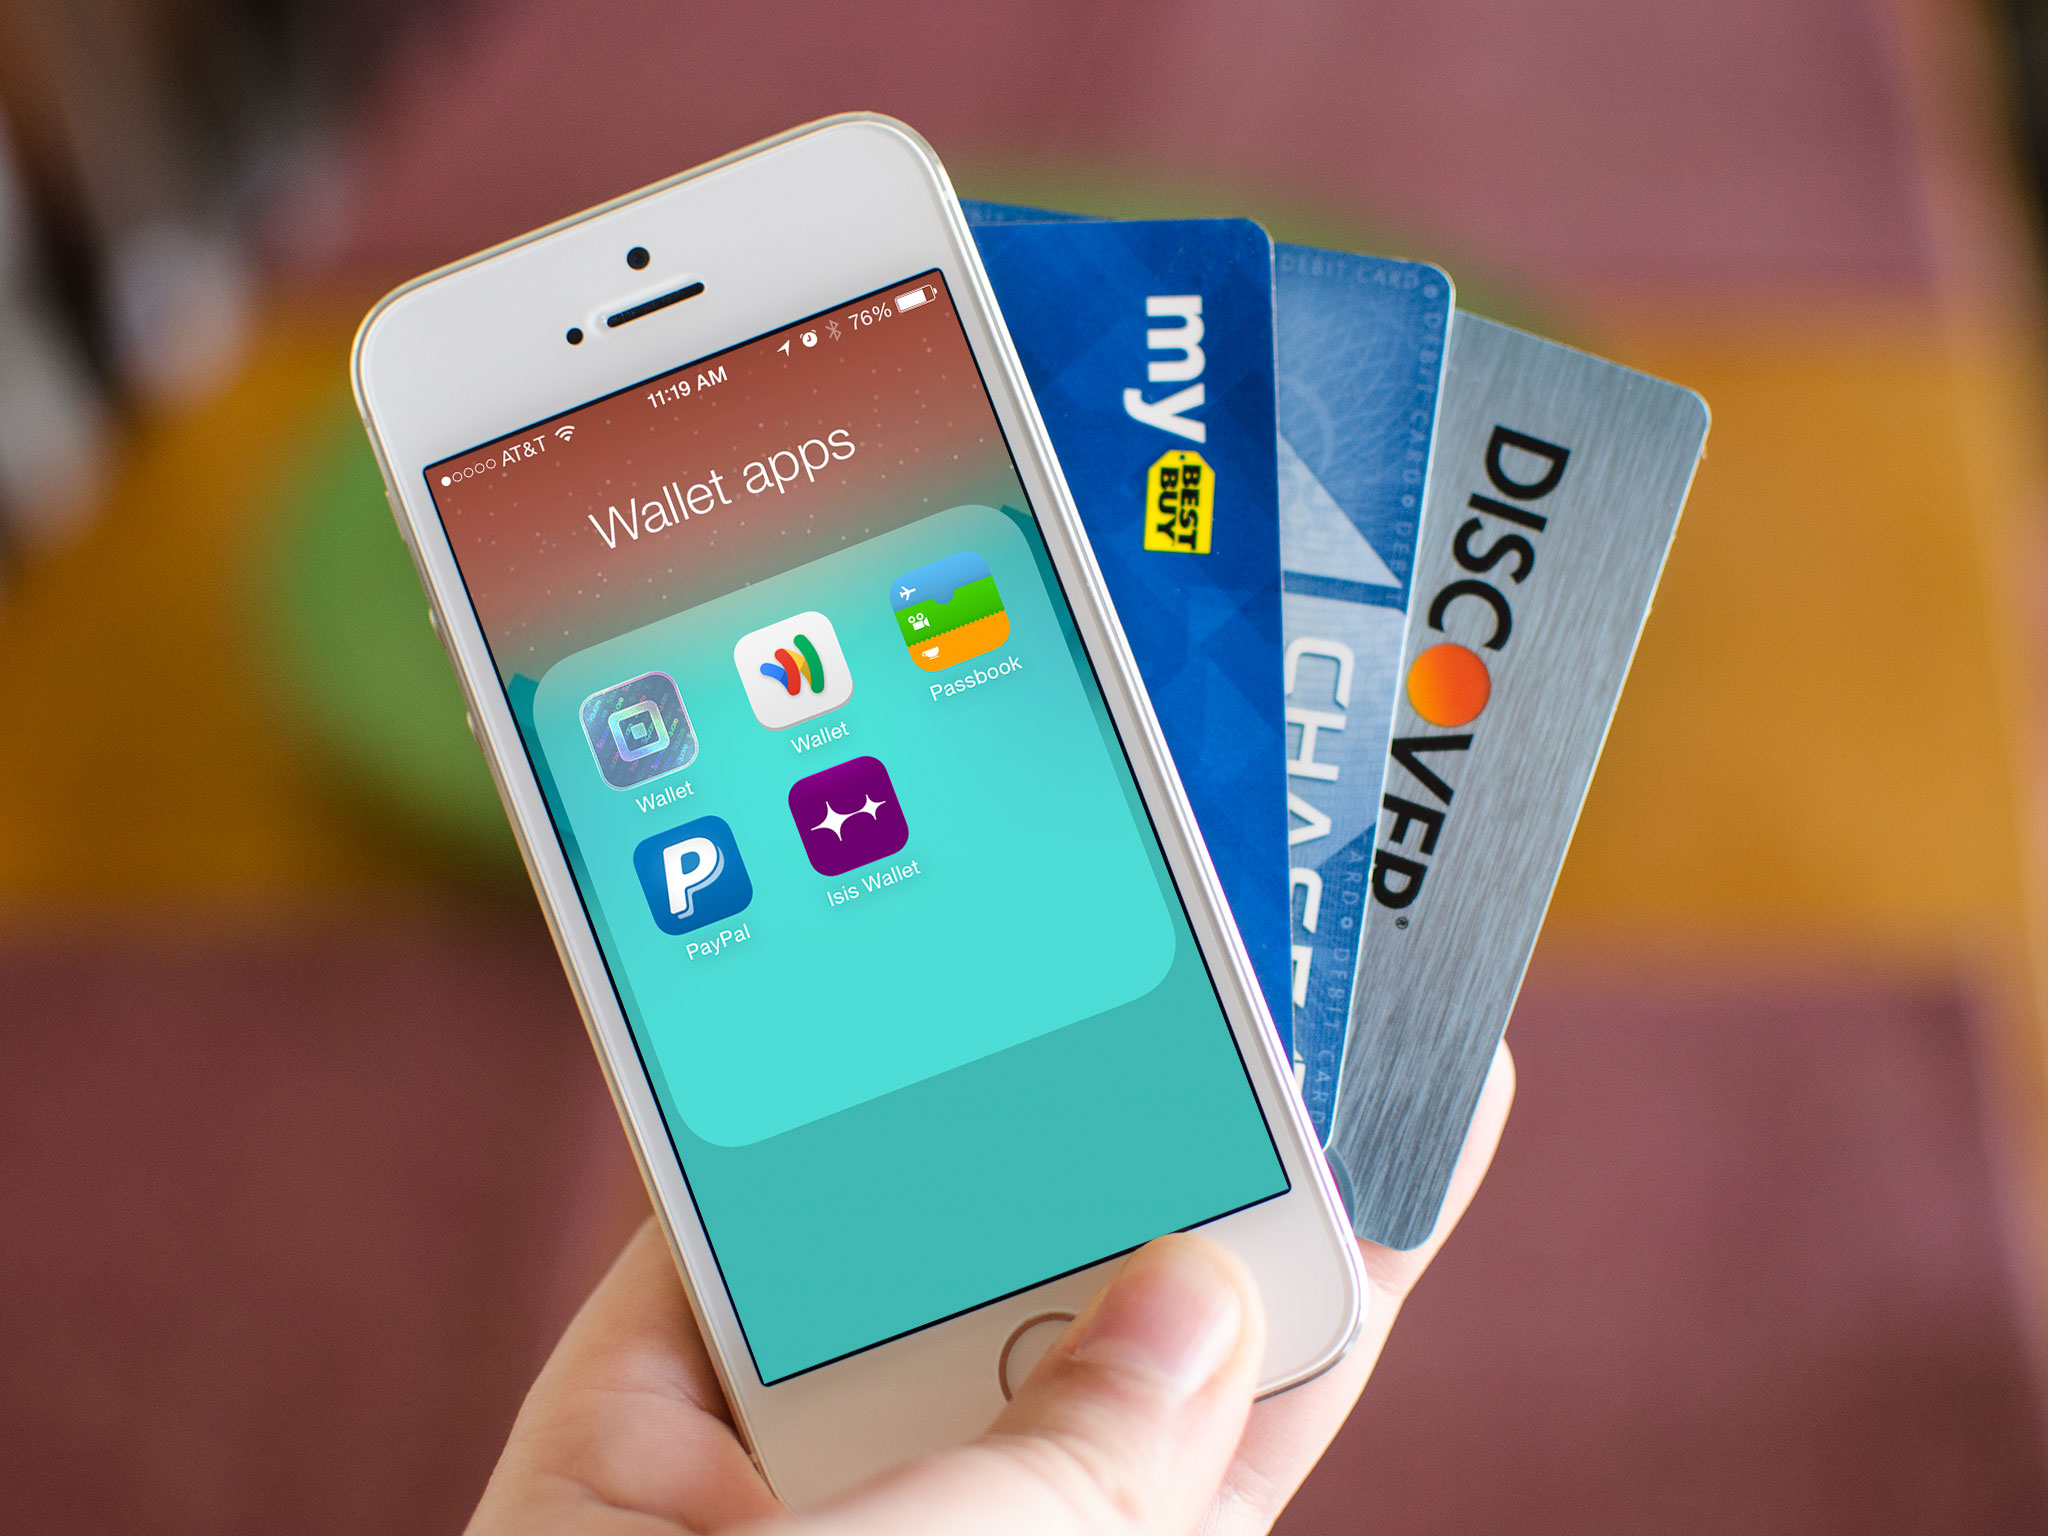 Rumored mobile wallet talk has Apple putting its money where its mouth is